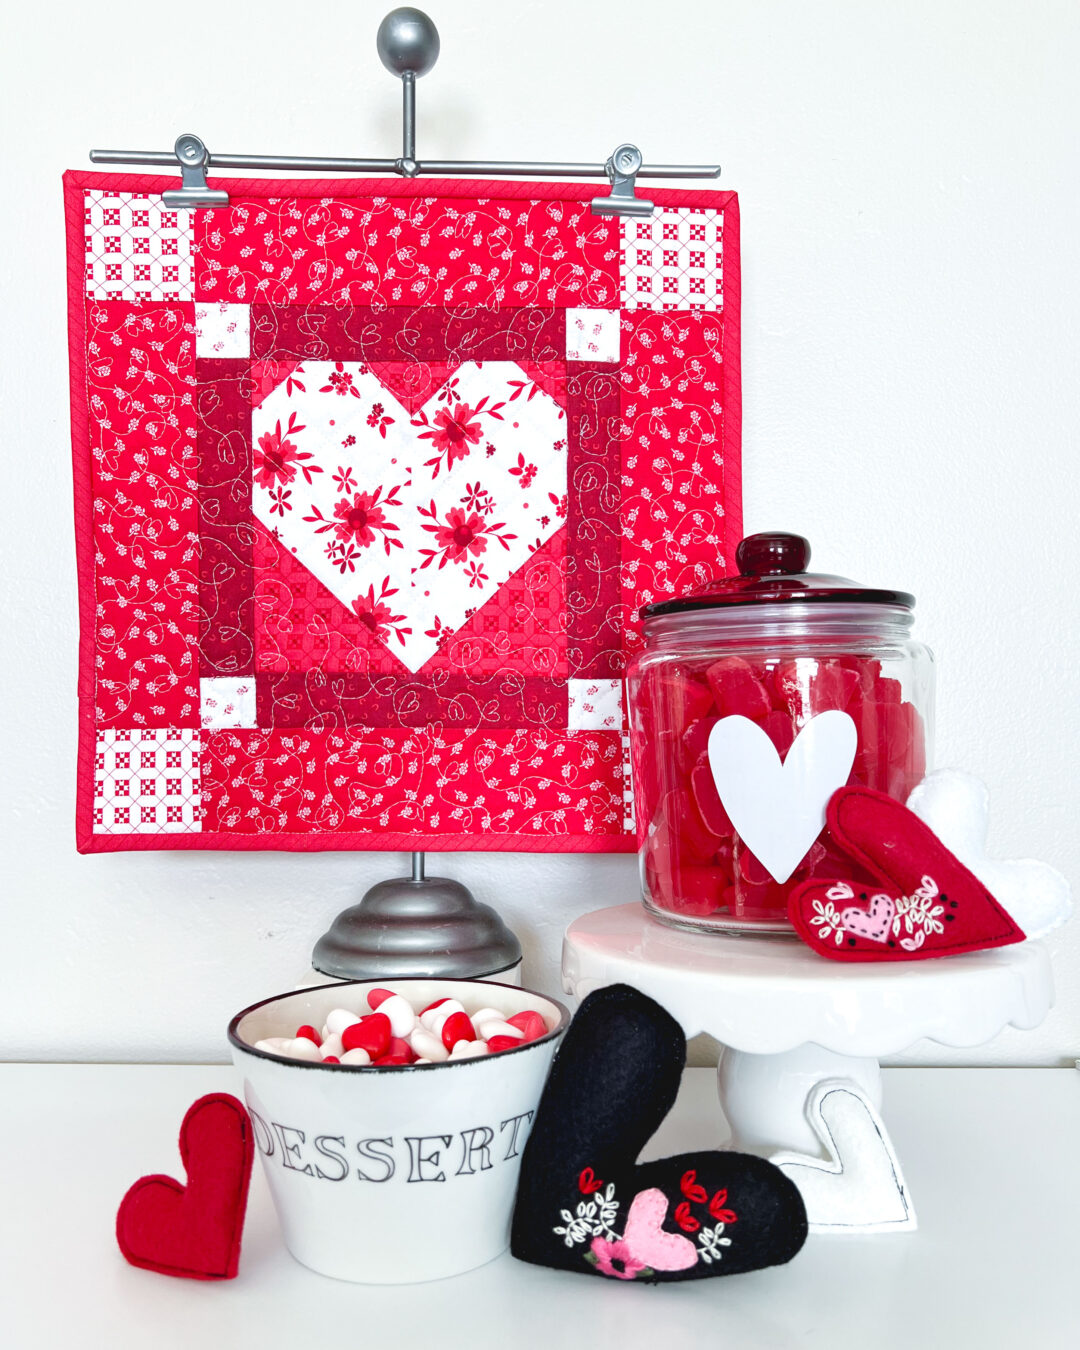 3 tips to sew Valentine's Decor you will adore - Ameroonie Designs